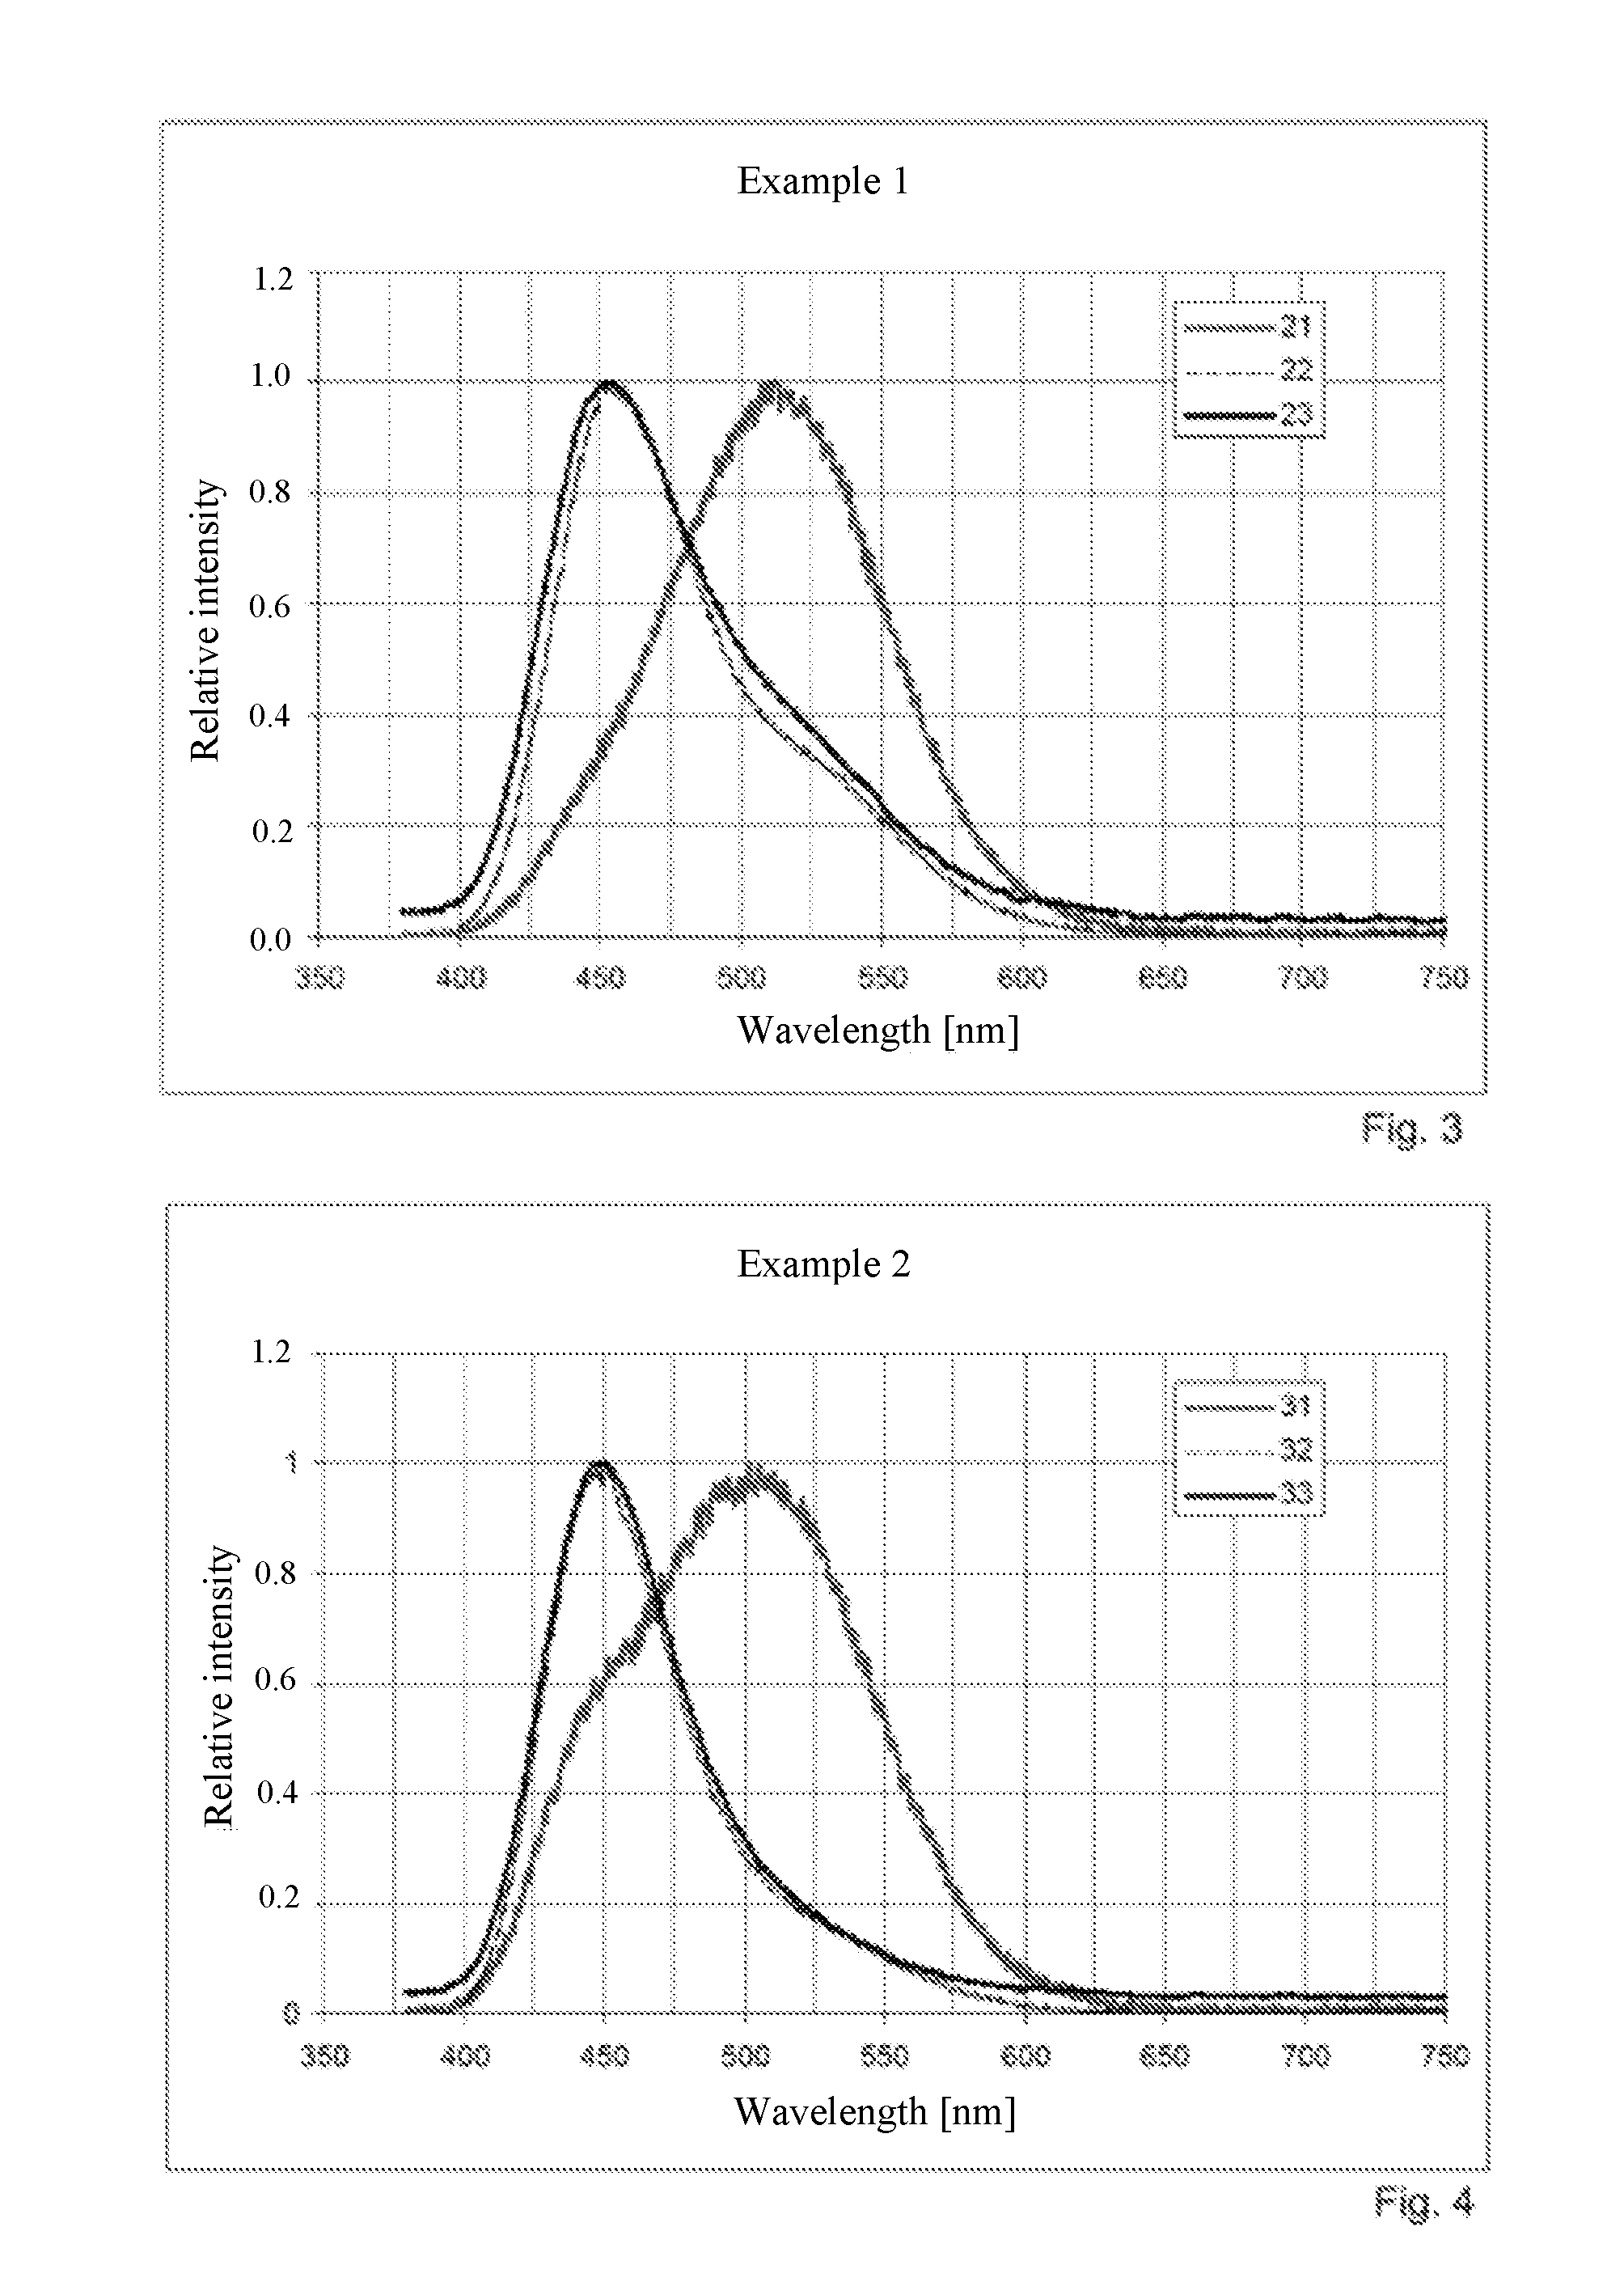 Zinc sulphide phosphor having photo-and electroluminescent properties, process for producing same, and security document, security feature and method for detecting same